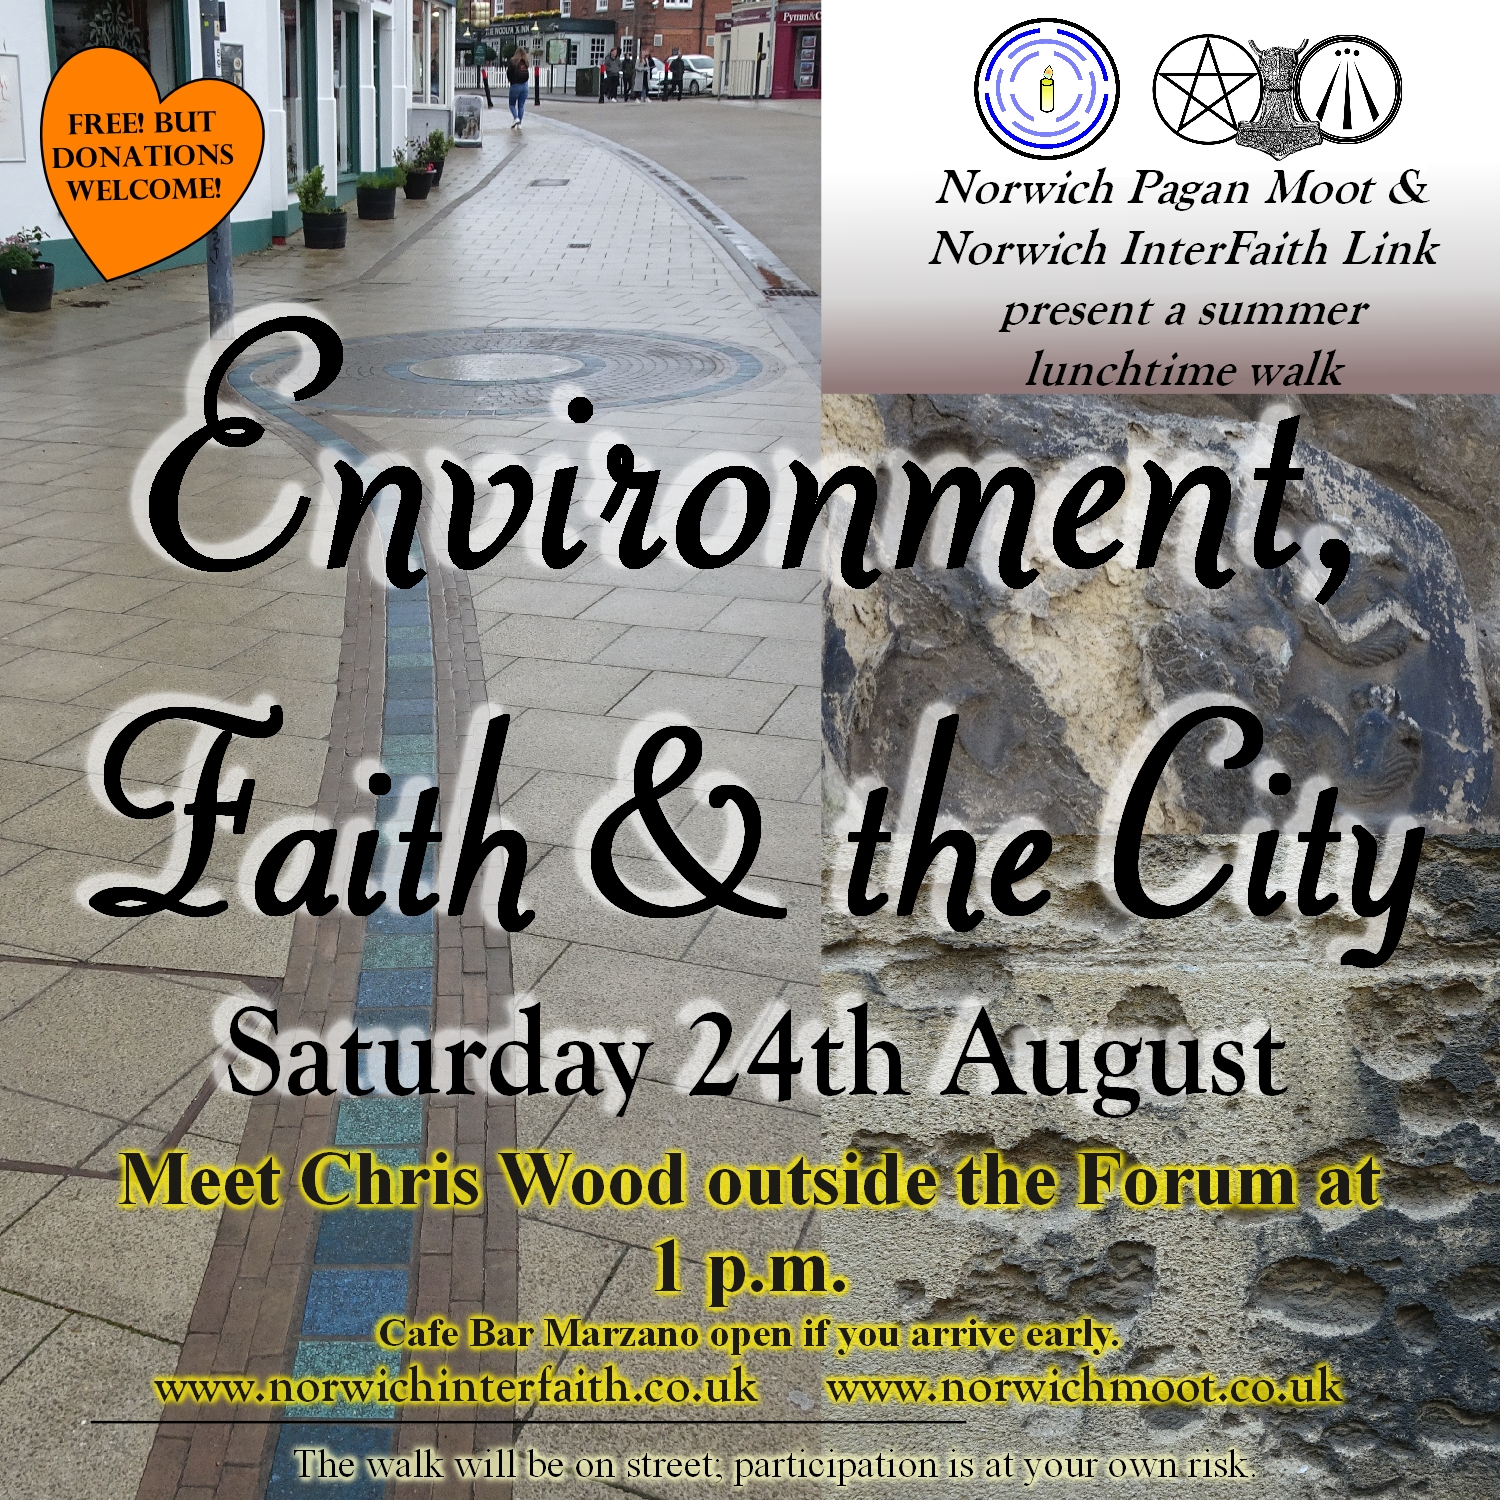 Image promoting the lunchtime walk shared with Norwich InterFaith Link on 24th August, showing the Great Cockey artwork on Westlegate and stone eroded by air pollution on churches, with the Norwich Moot and Norwich InterFaith Link logos, and the fact that Cafe Bar Marzano will be open beforehand and that the walk will be on street and participation is at one's own risk.